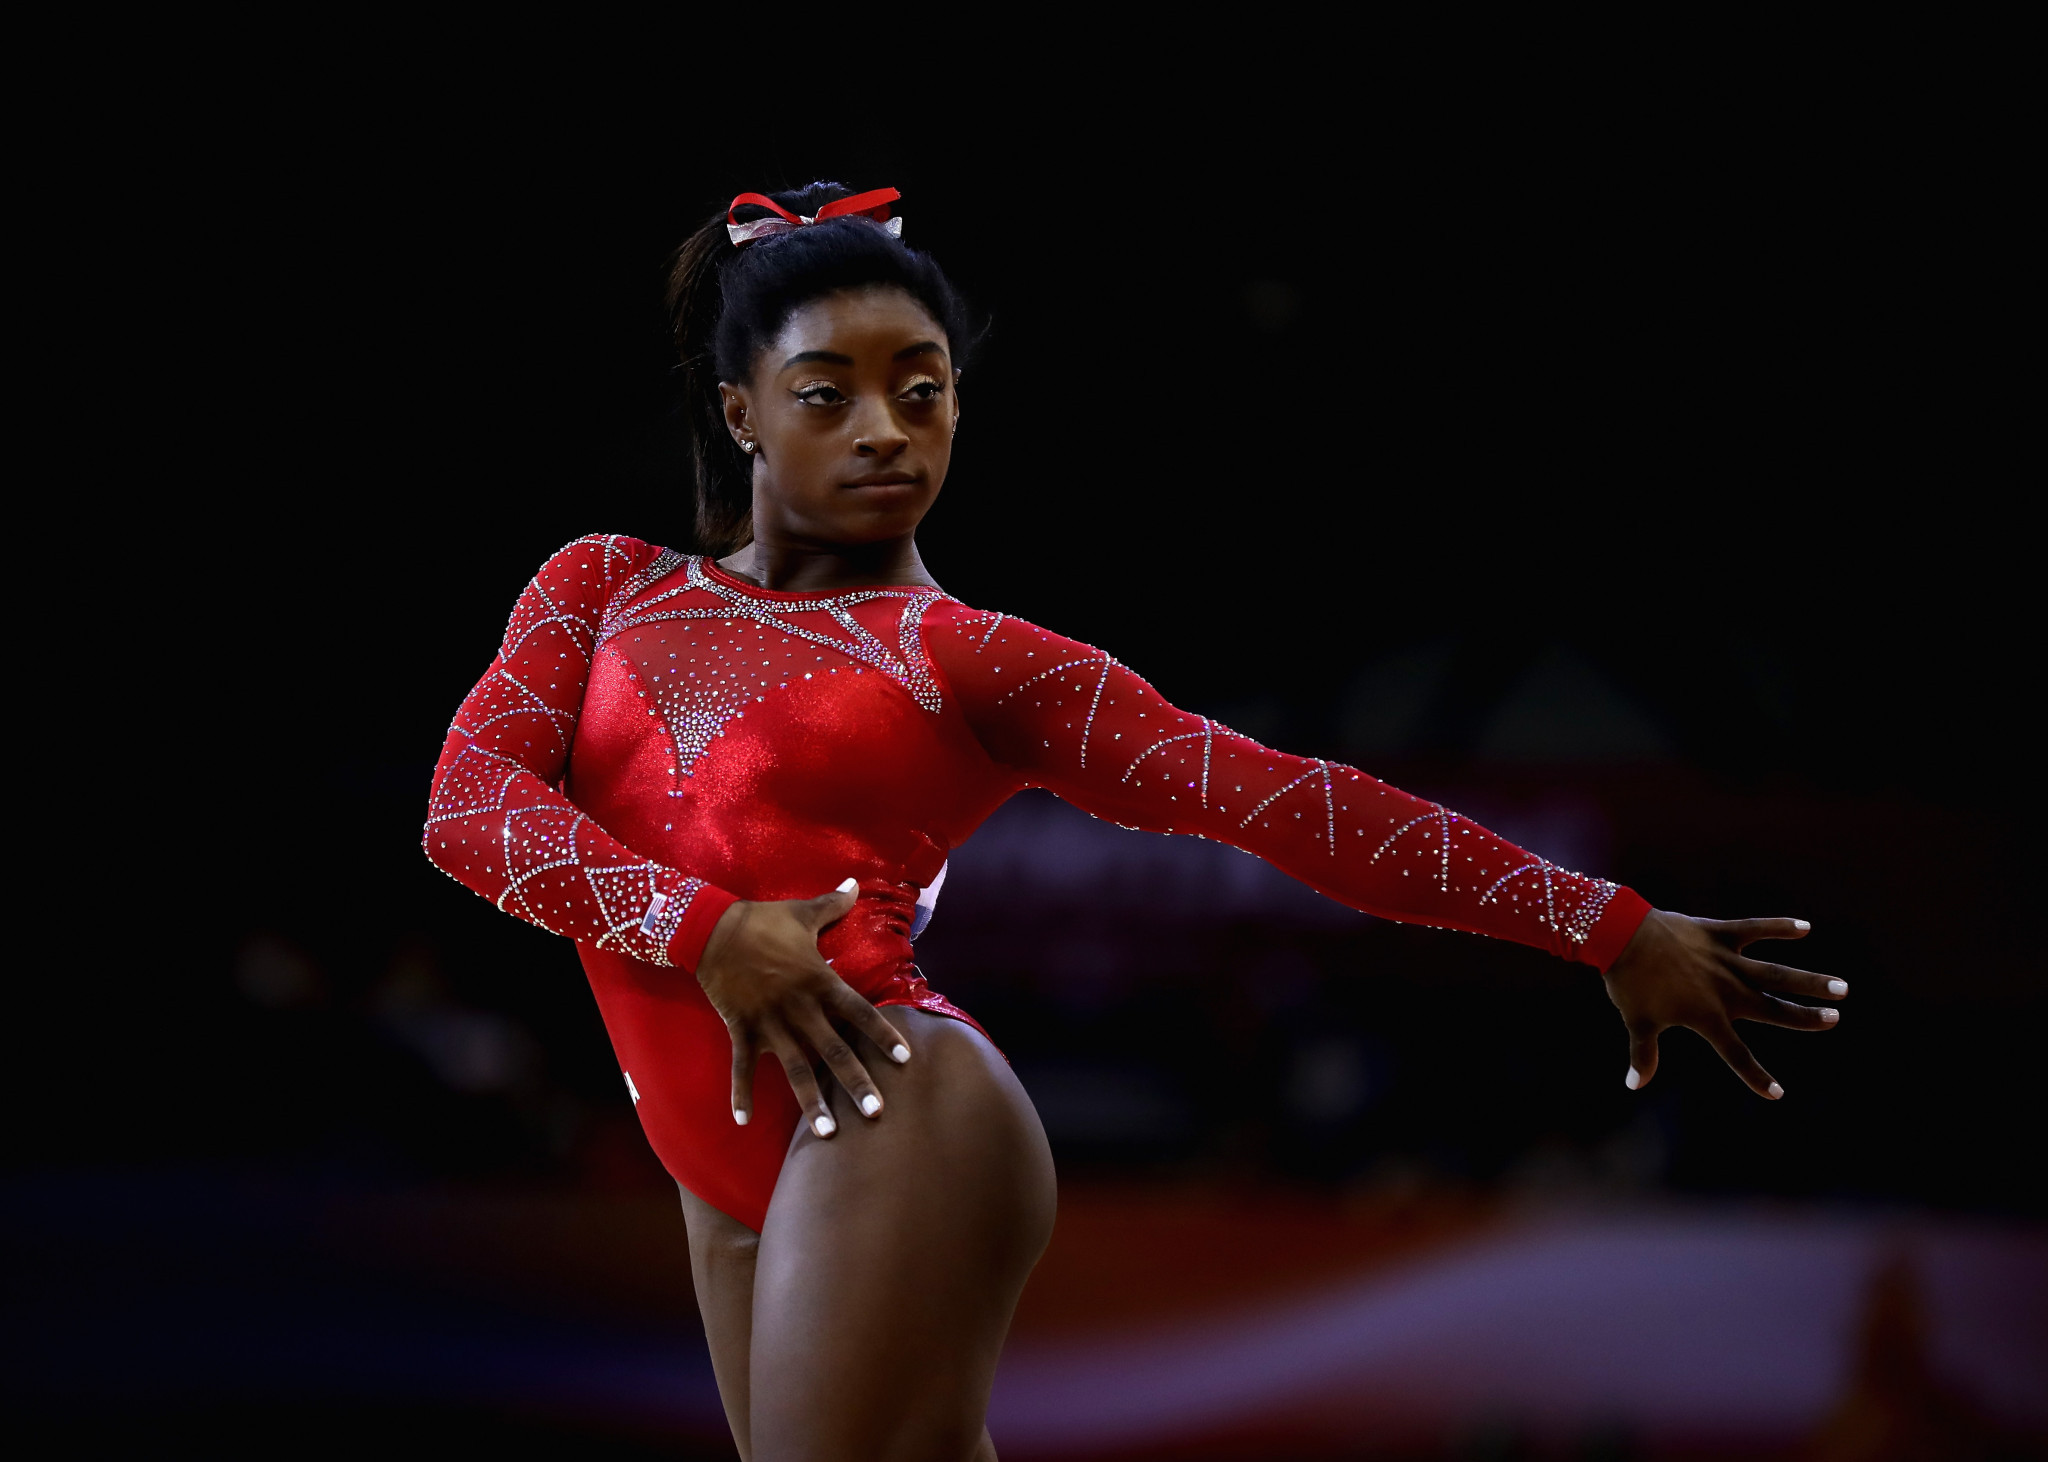 Simon Biles of the United States has had an original element she performed at the 2018 Artistic Gymnastics World Championships named after her ©Getty Images